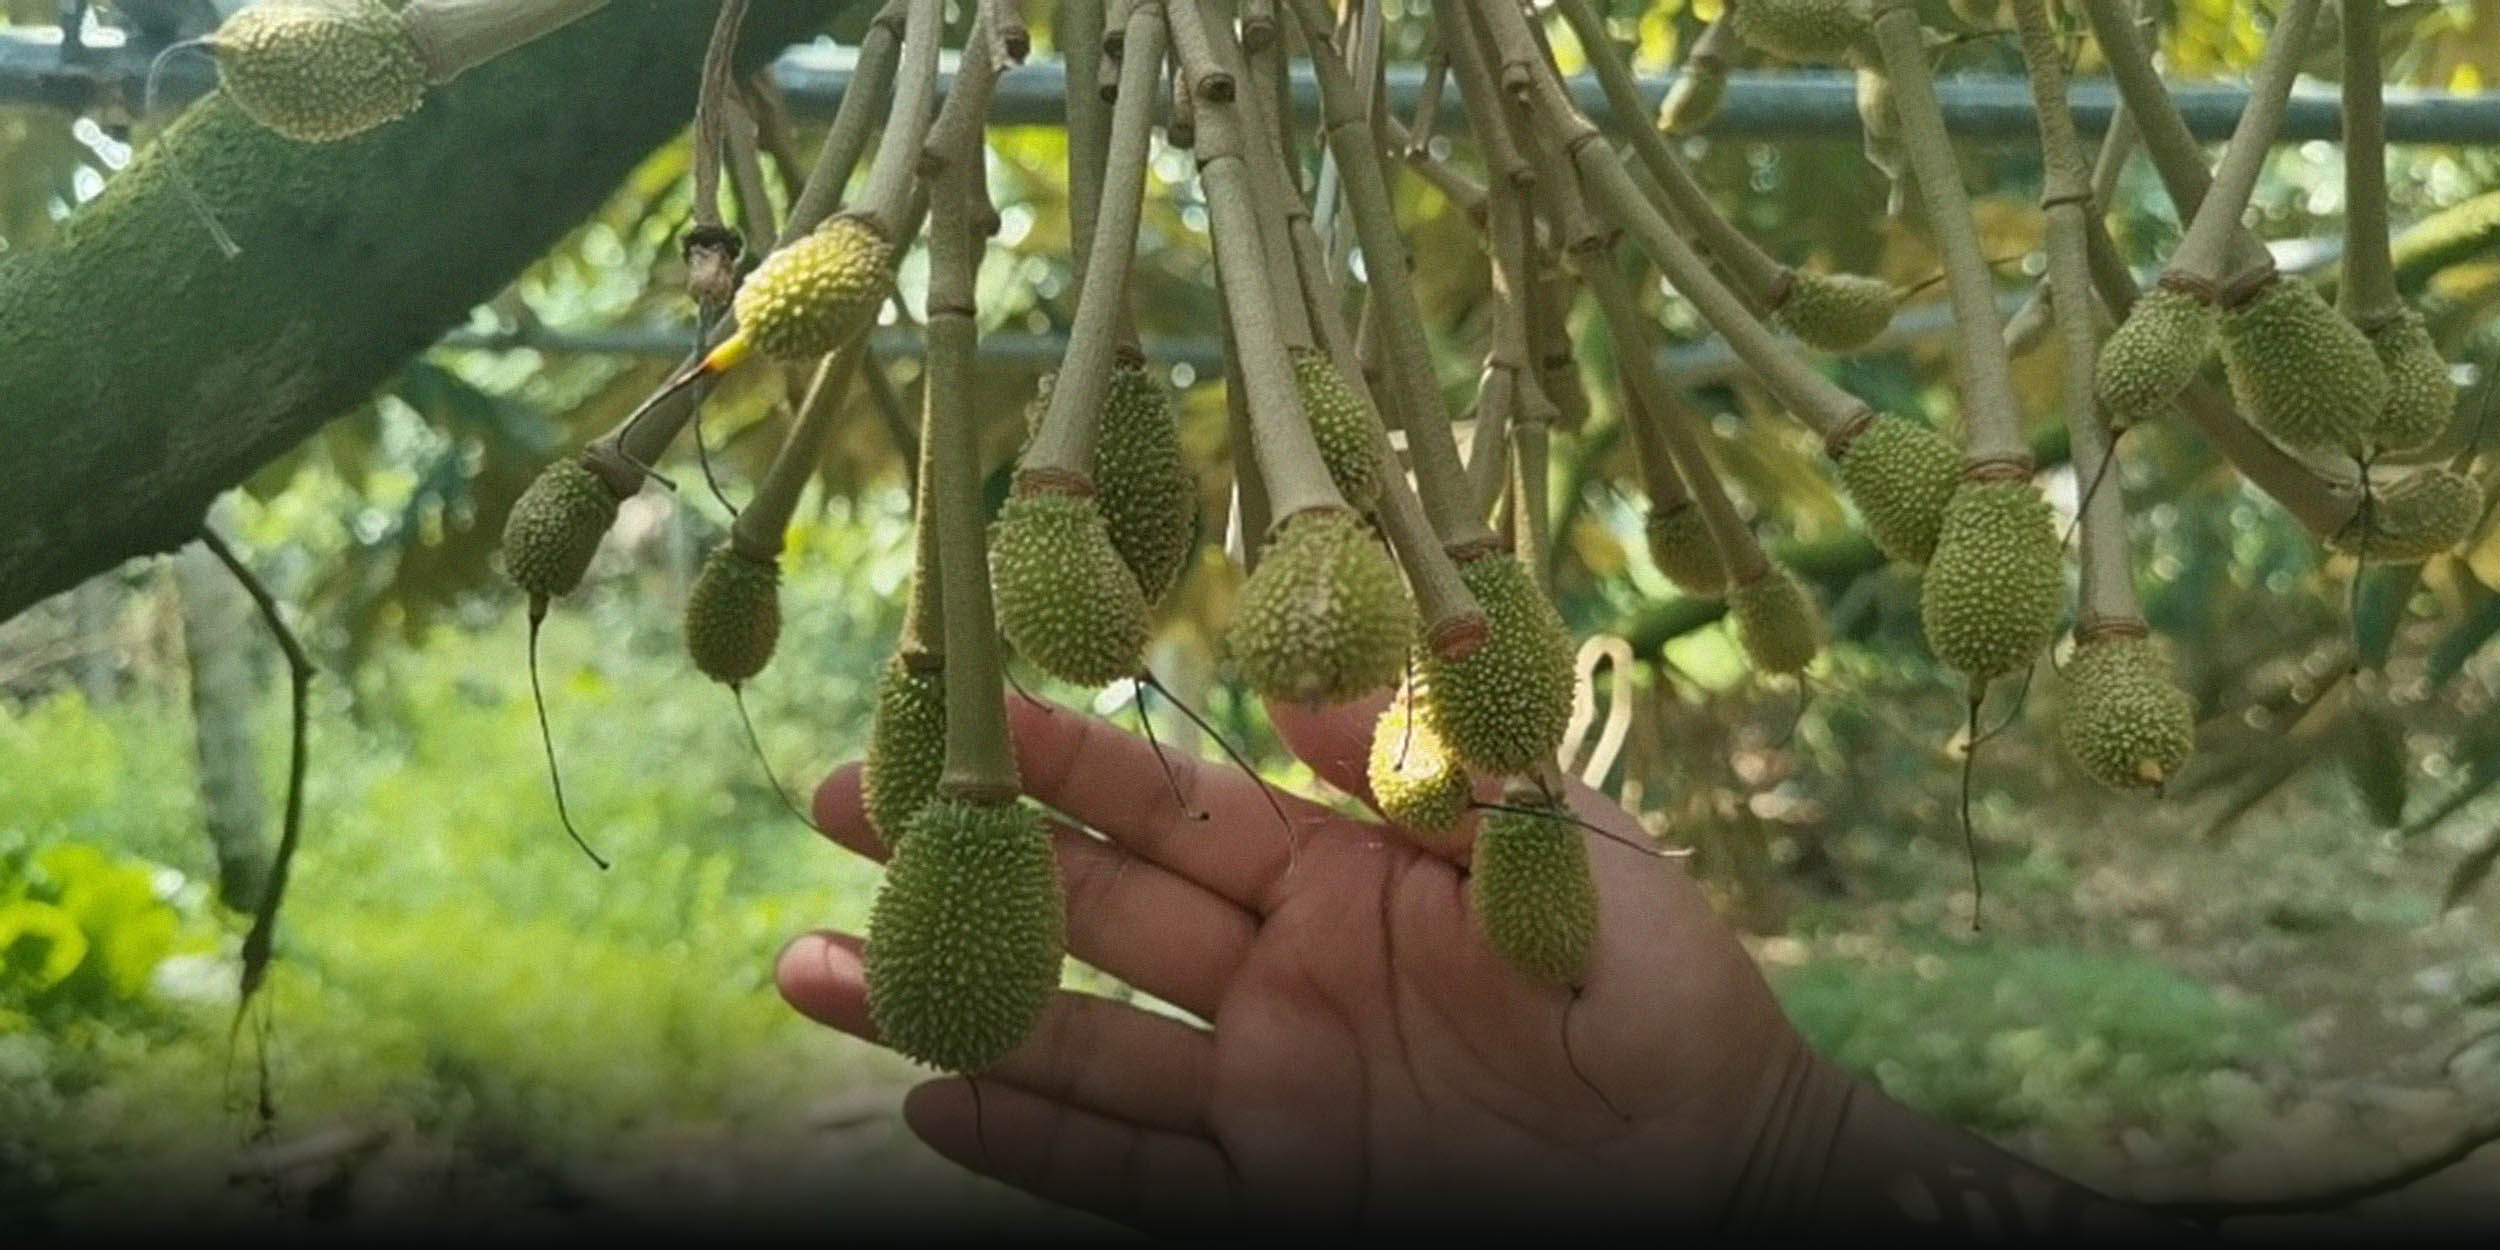 Durian Fans Sniff a Price Drop as China Readies Its Own Harvest